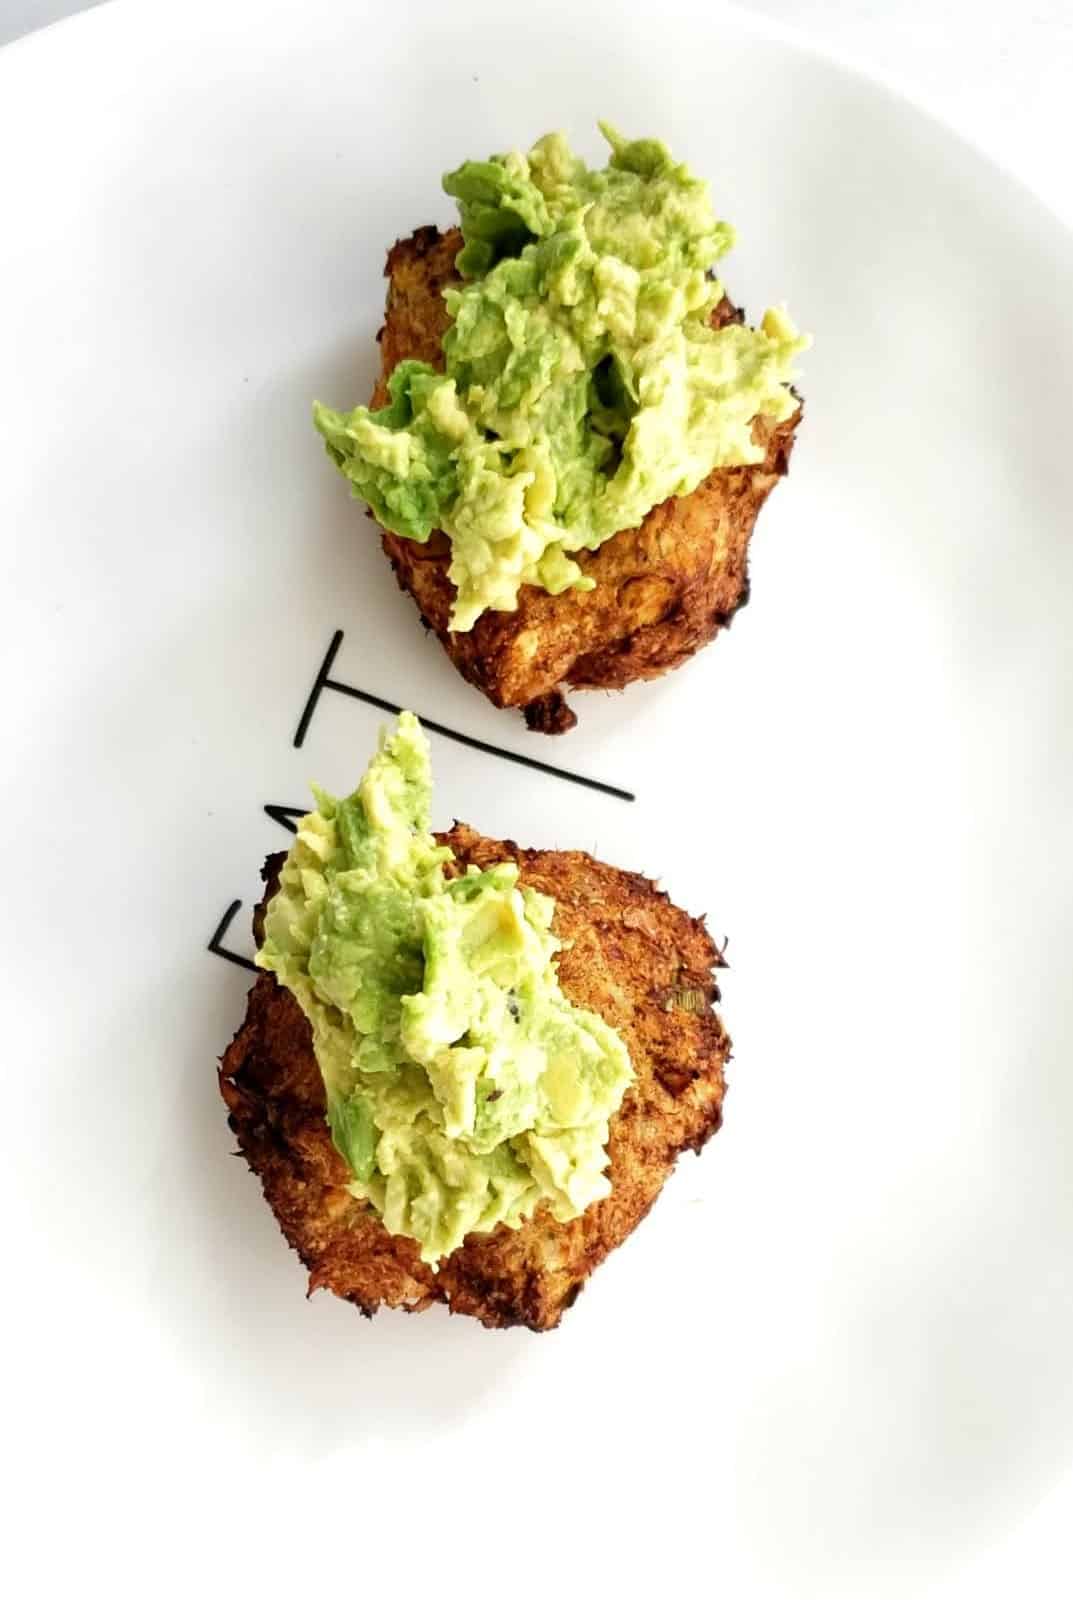 two air fryer salmon patties topped with avocado